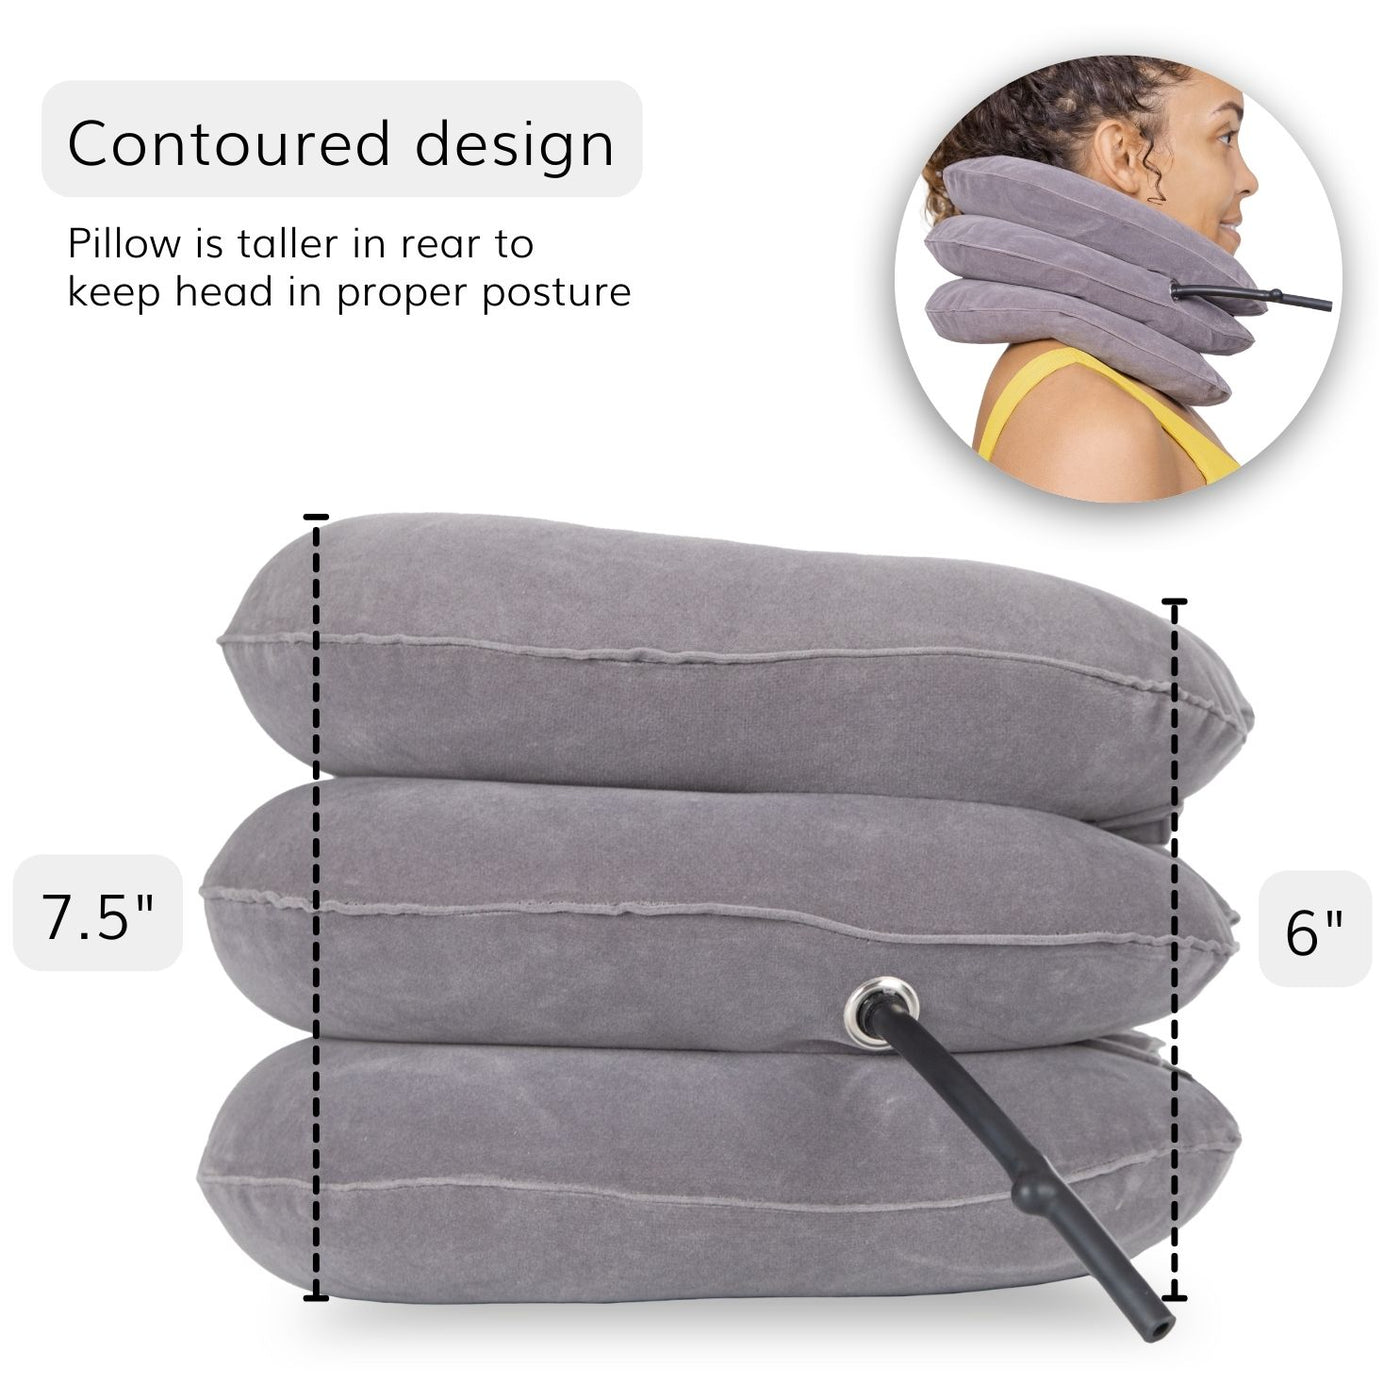 Our contoured neck pillow for pain relief is taller in the back to keep head in proper posture